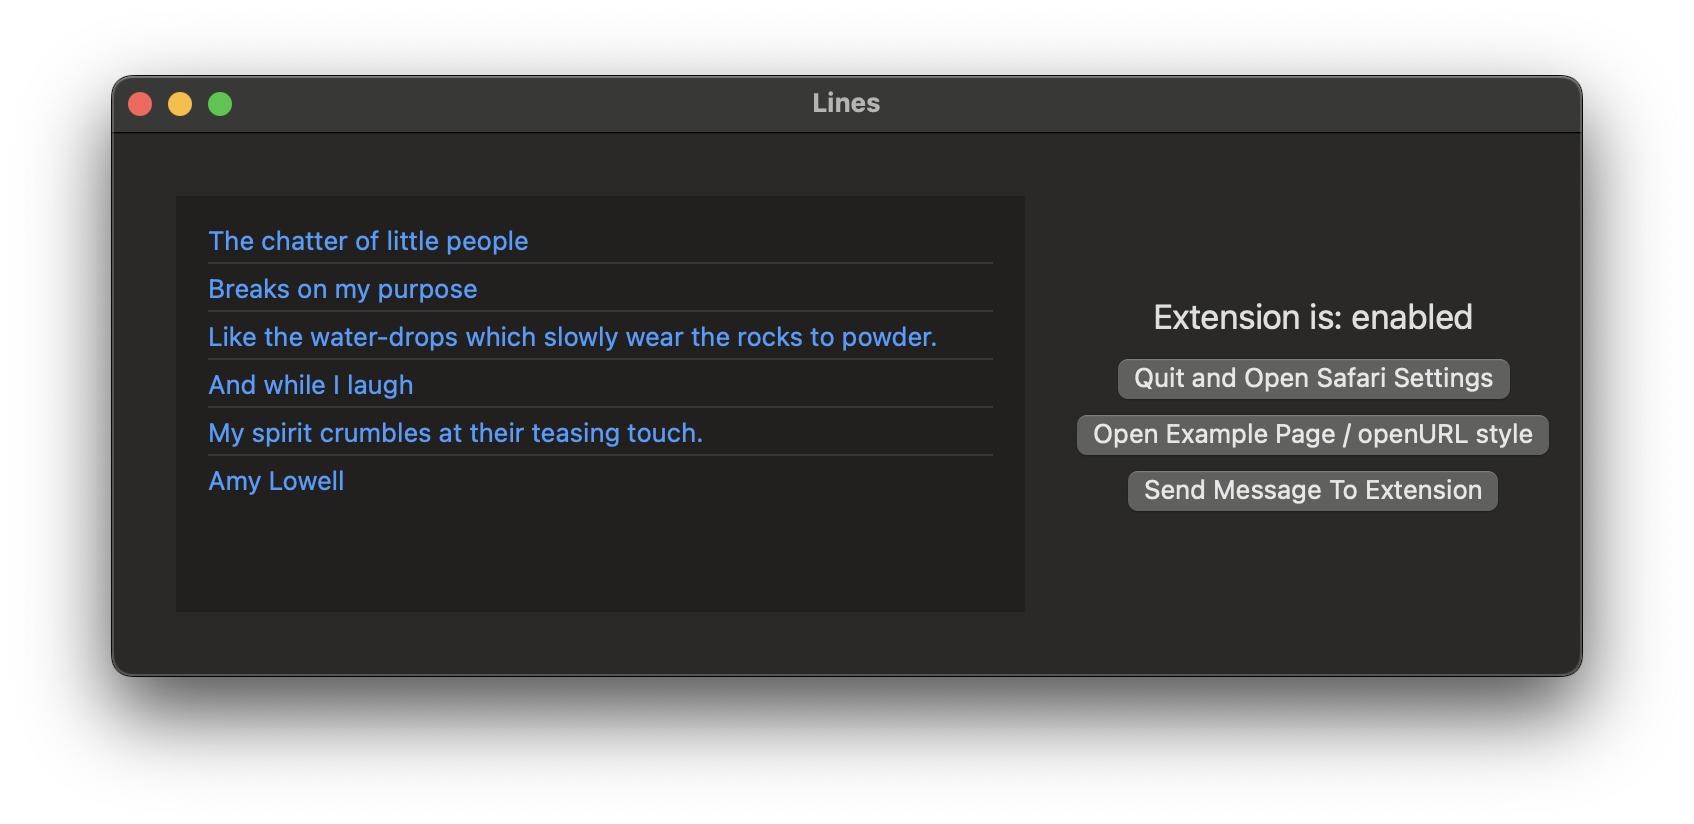 Screenshot of the macOS version of the Lines App, now with extension related details like whether the extension is enabled.